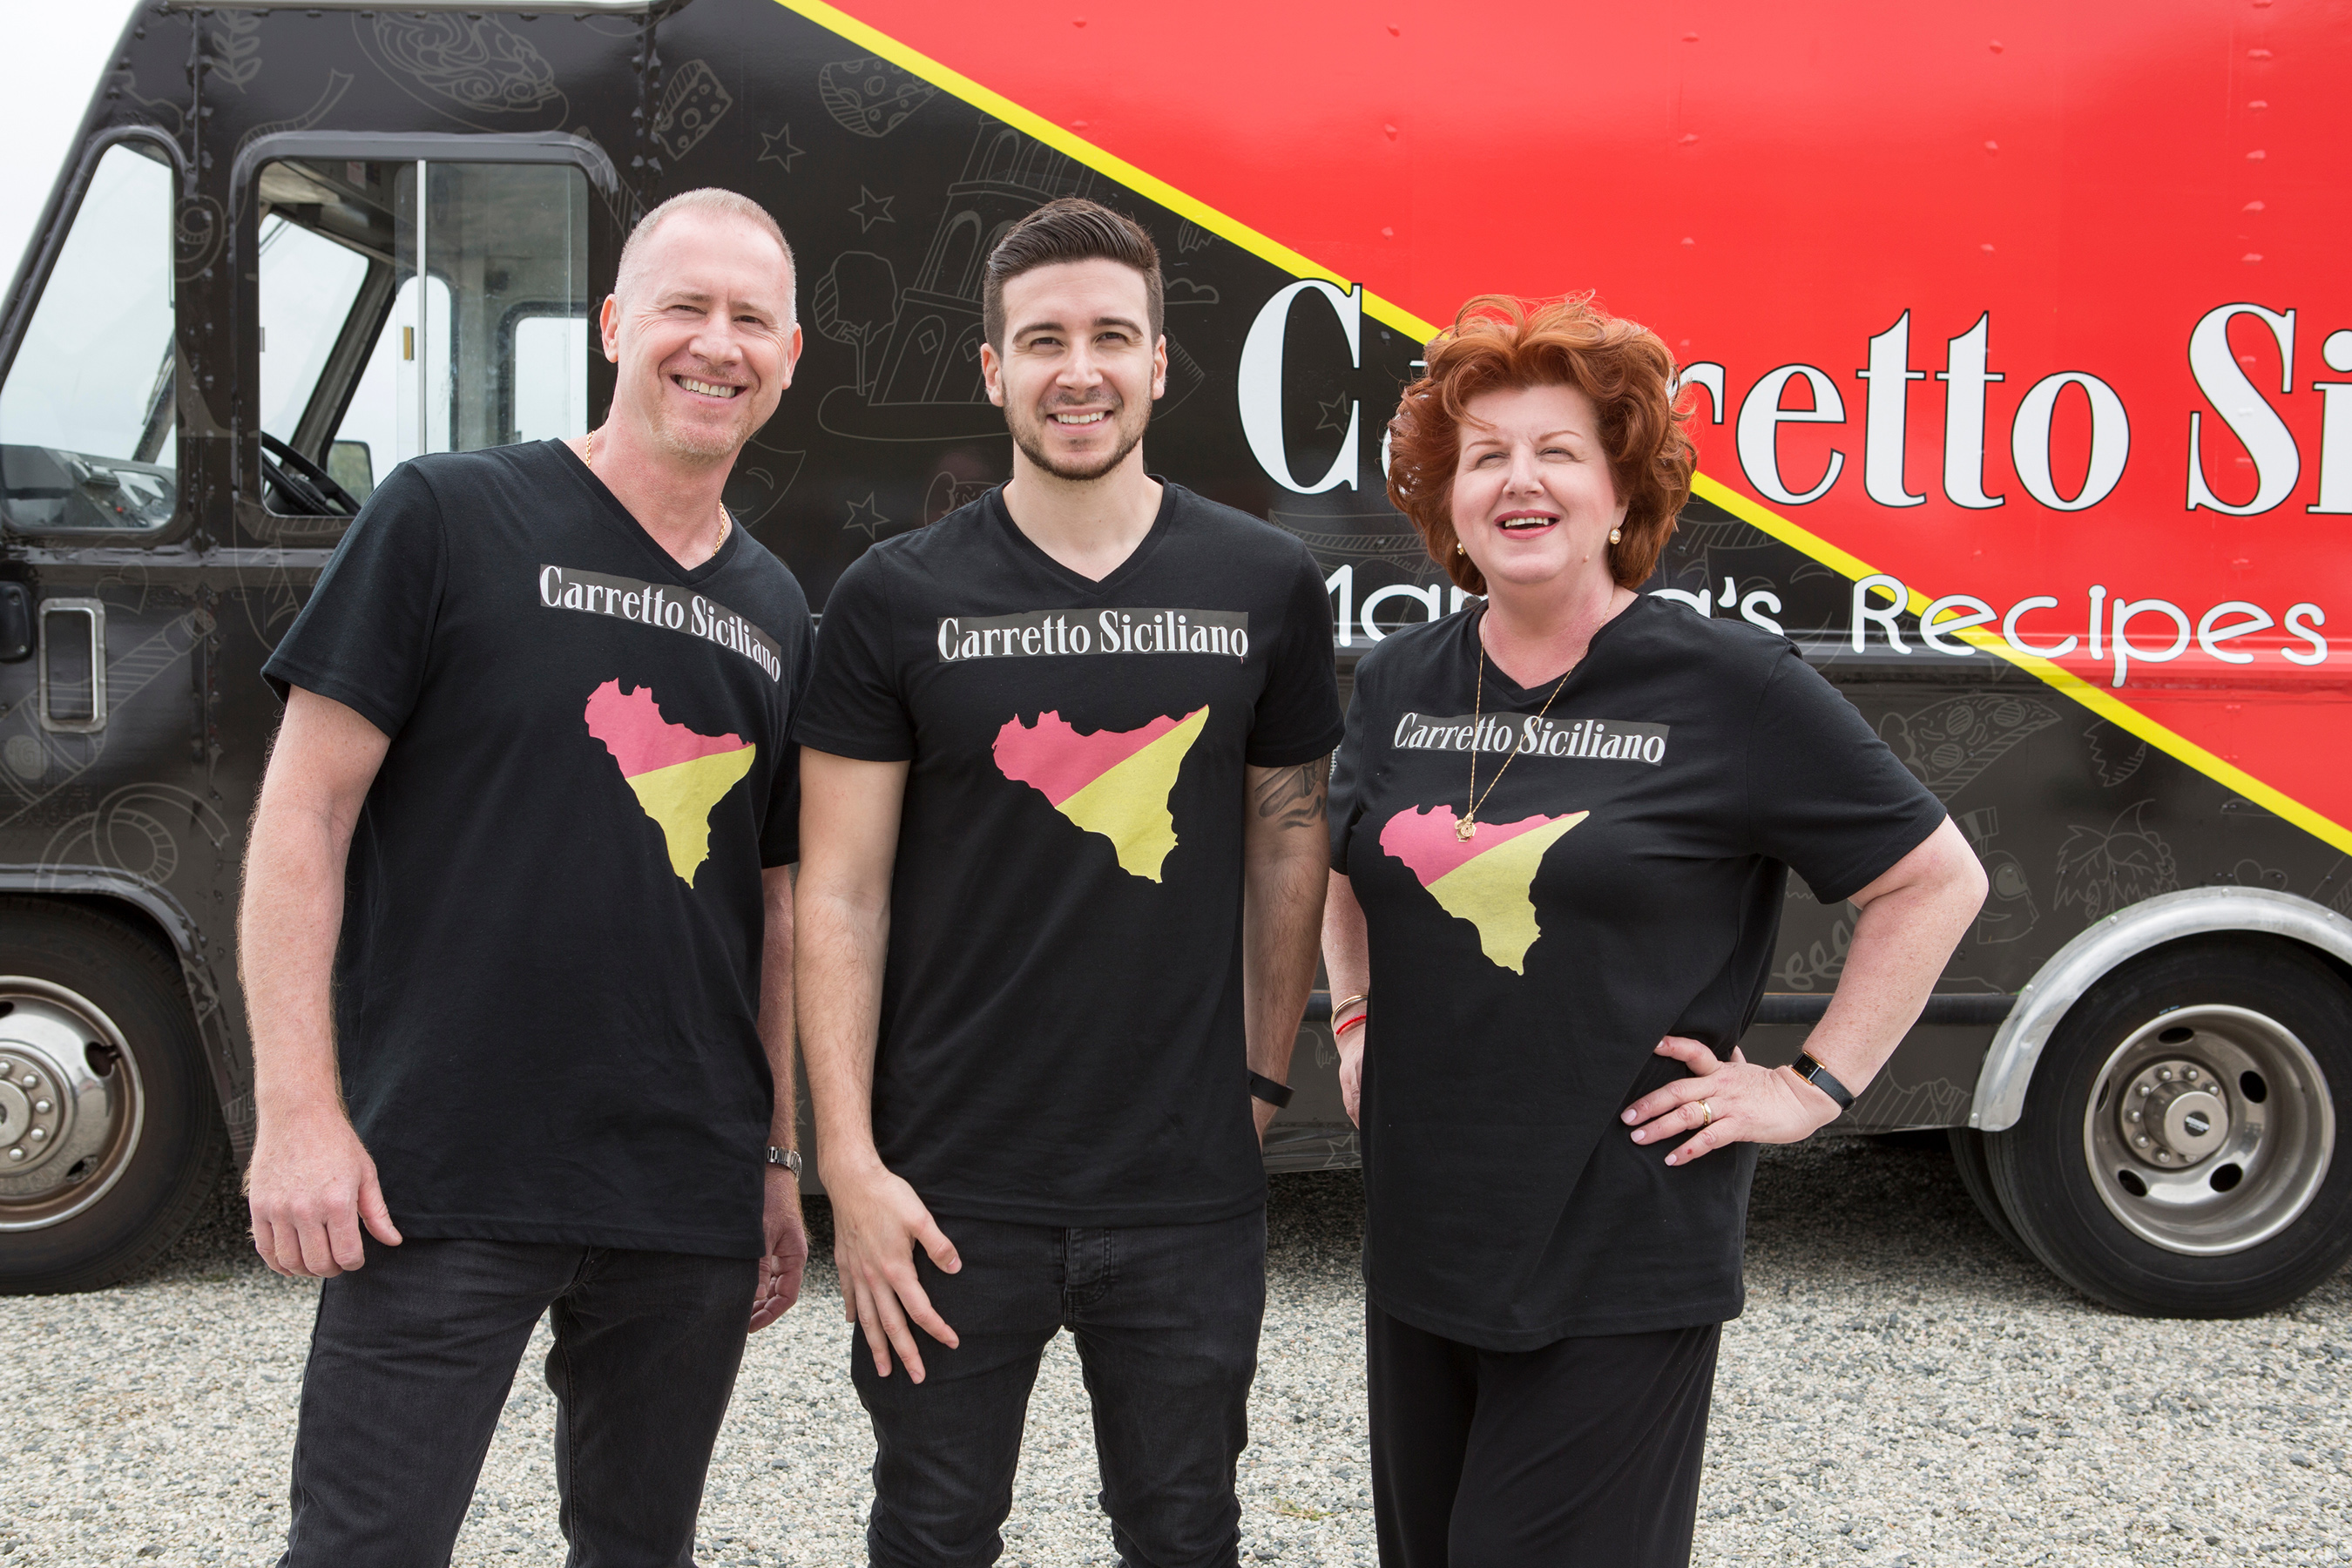 Team Carretto Siciliano, Angelo Giaimo, Vinny Guadagnino and Paola Guadagnino, on Food Network's The Great Food Truck Race